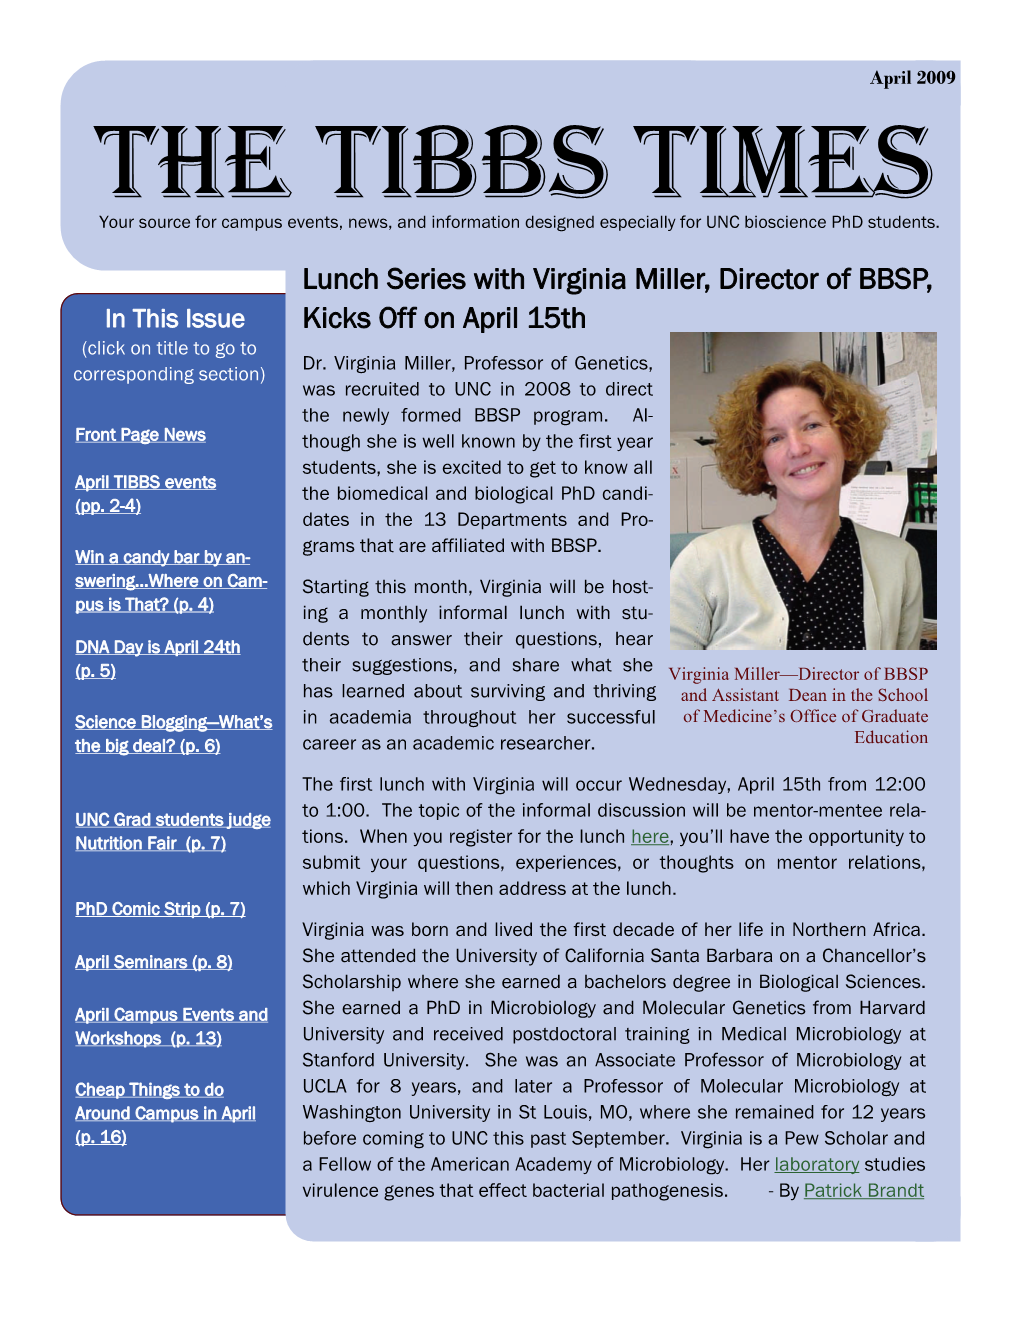 THE TIBBS TIMES Your Source for Campus Events, News, and Information Designed Especially for UNC Bioscience Phd Students